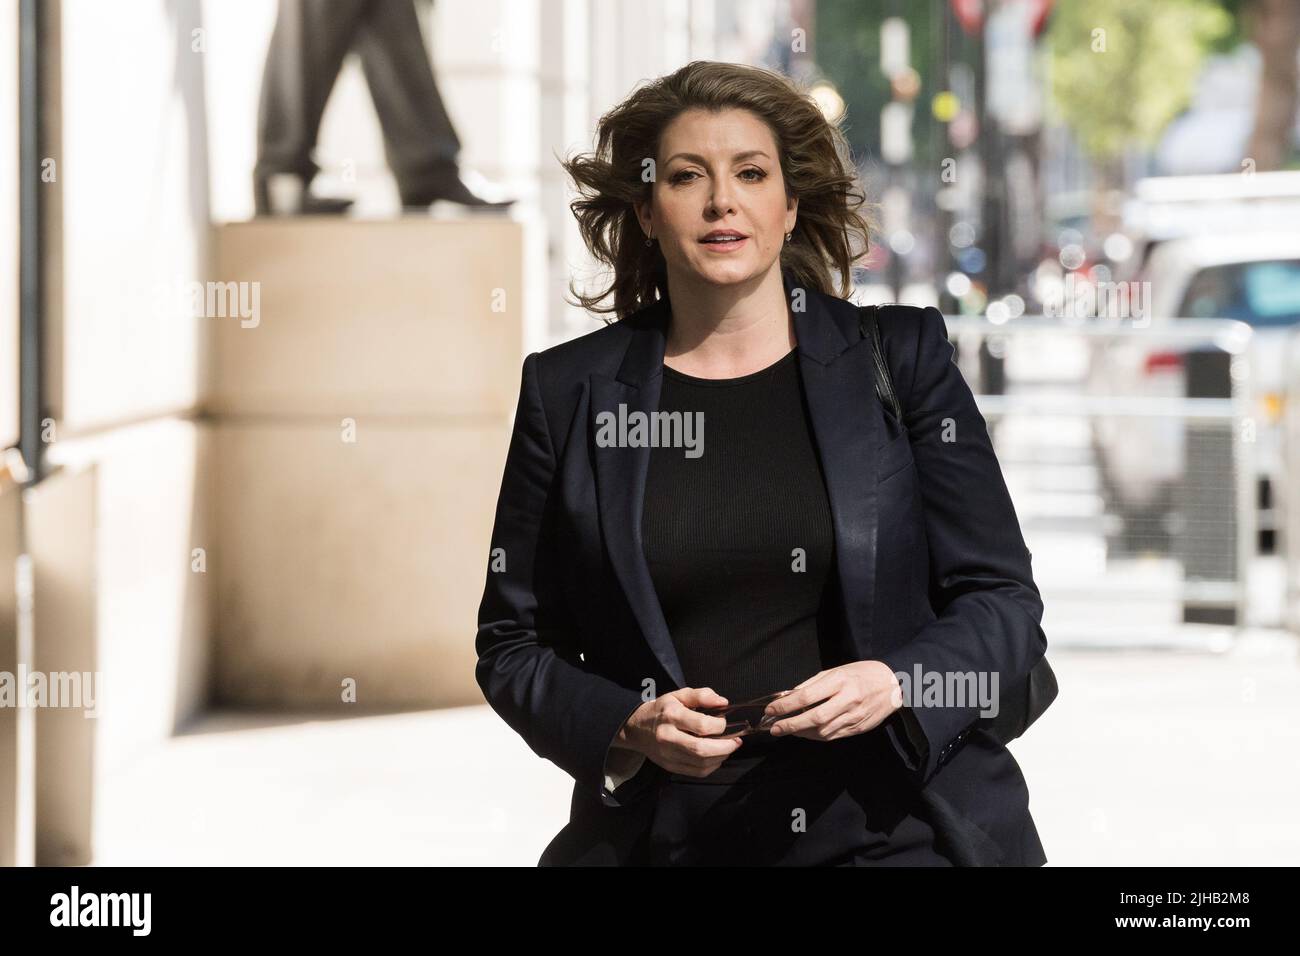 London, UK. 17th July, 2022. Conservative Party Leadership hopeful Penny Mordaunt MP arrives at the BBC Broadcasting House to appear on the Sunday Morning show hosted by Sophie Raworth. The number of candidates in the contest to replace Boris Johnson as the leader of the Conservative Party and the new British prime minister will be narrowed down to the final two in a series of votes by MPs in Parliament next week, followed by postal ballot of party members with a winner announced on 5 September. Credit: Wiktor Szymanowicz/Alamy Live News Stock Photo